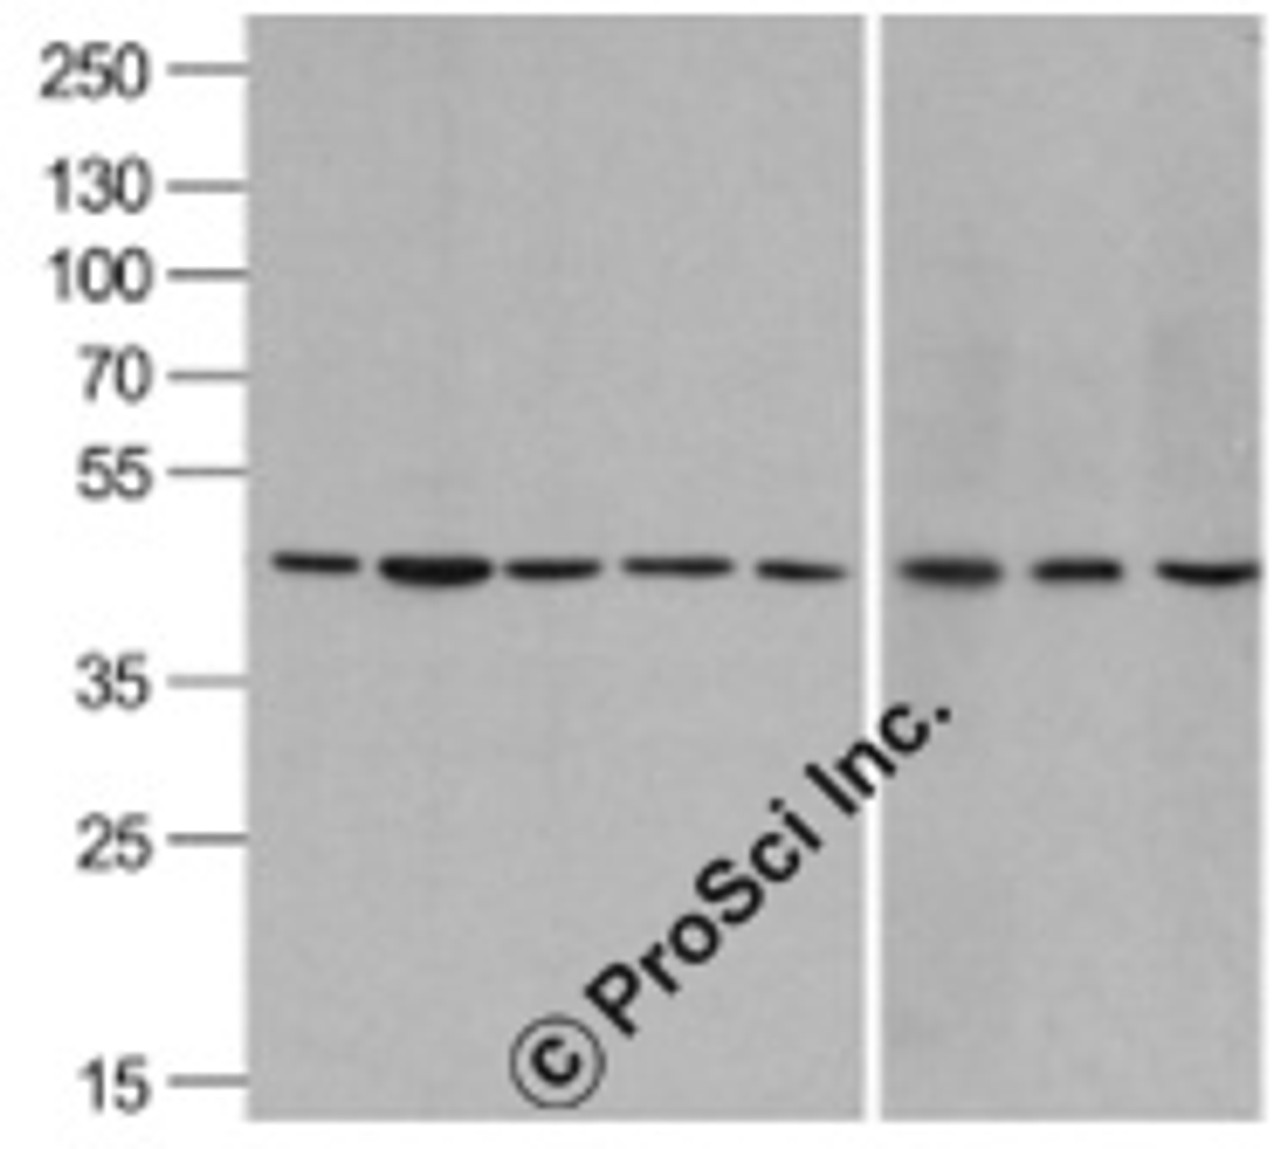 Western blot analysis of beta-Actin in A431, Daudi, HepG2, HL60, Jurkat, Human brain, Mouse lung, and Chicken liver lysate with beta-Actin antibody at 1 &#956;g/mL.